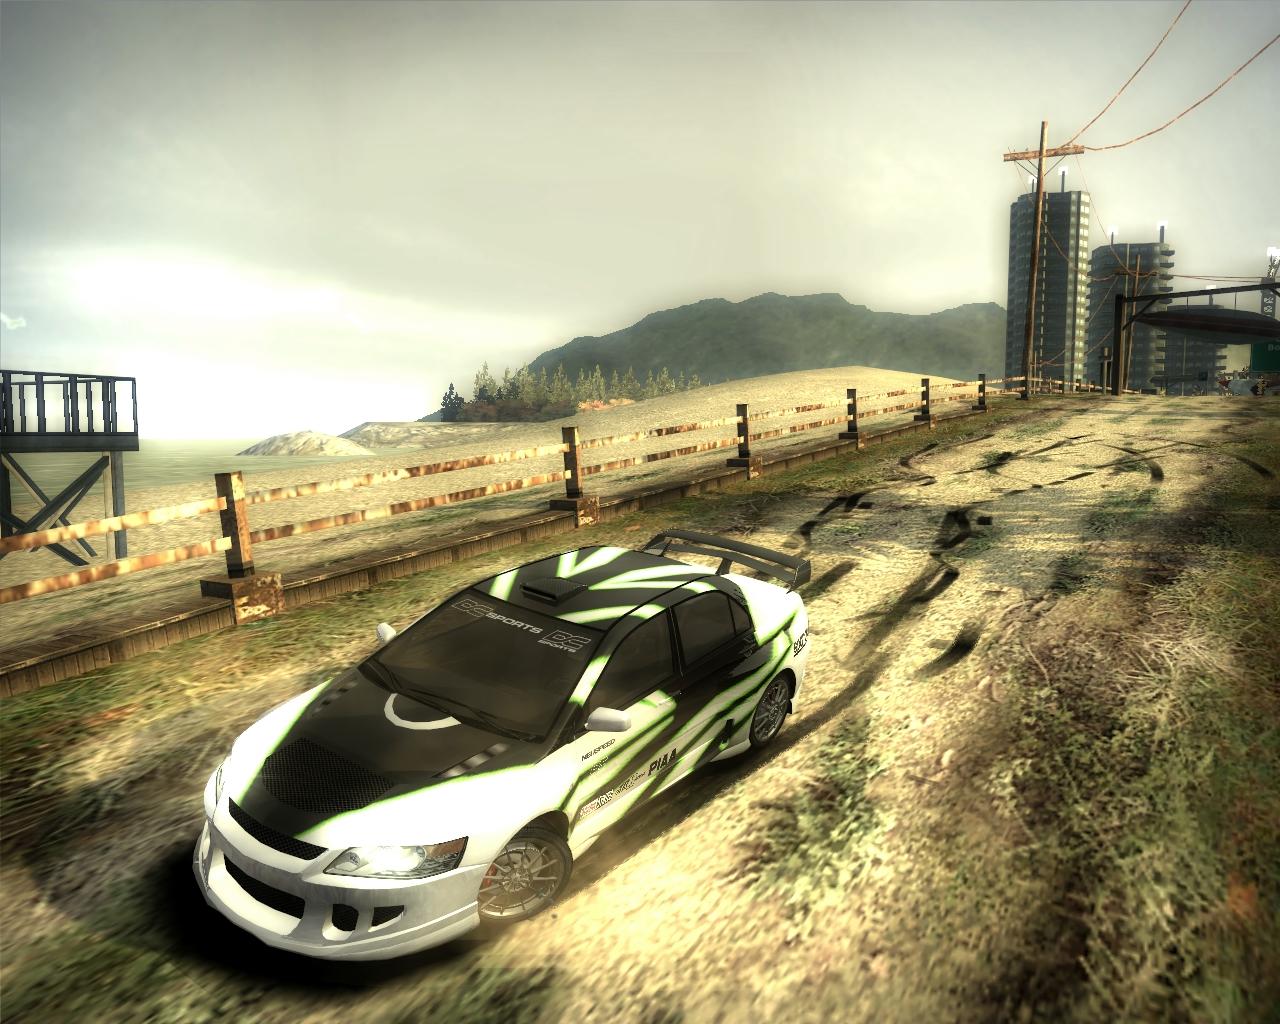 Need for speed wanted game. NFS most wanted. NFS MW 2005. Нид фор СПИД мост вантед 2005. Игра NFS most wanted 2005.